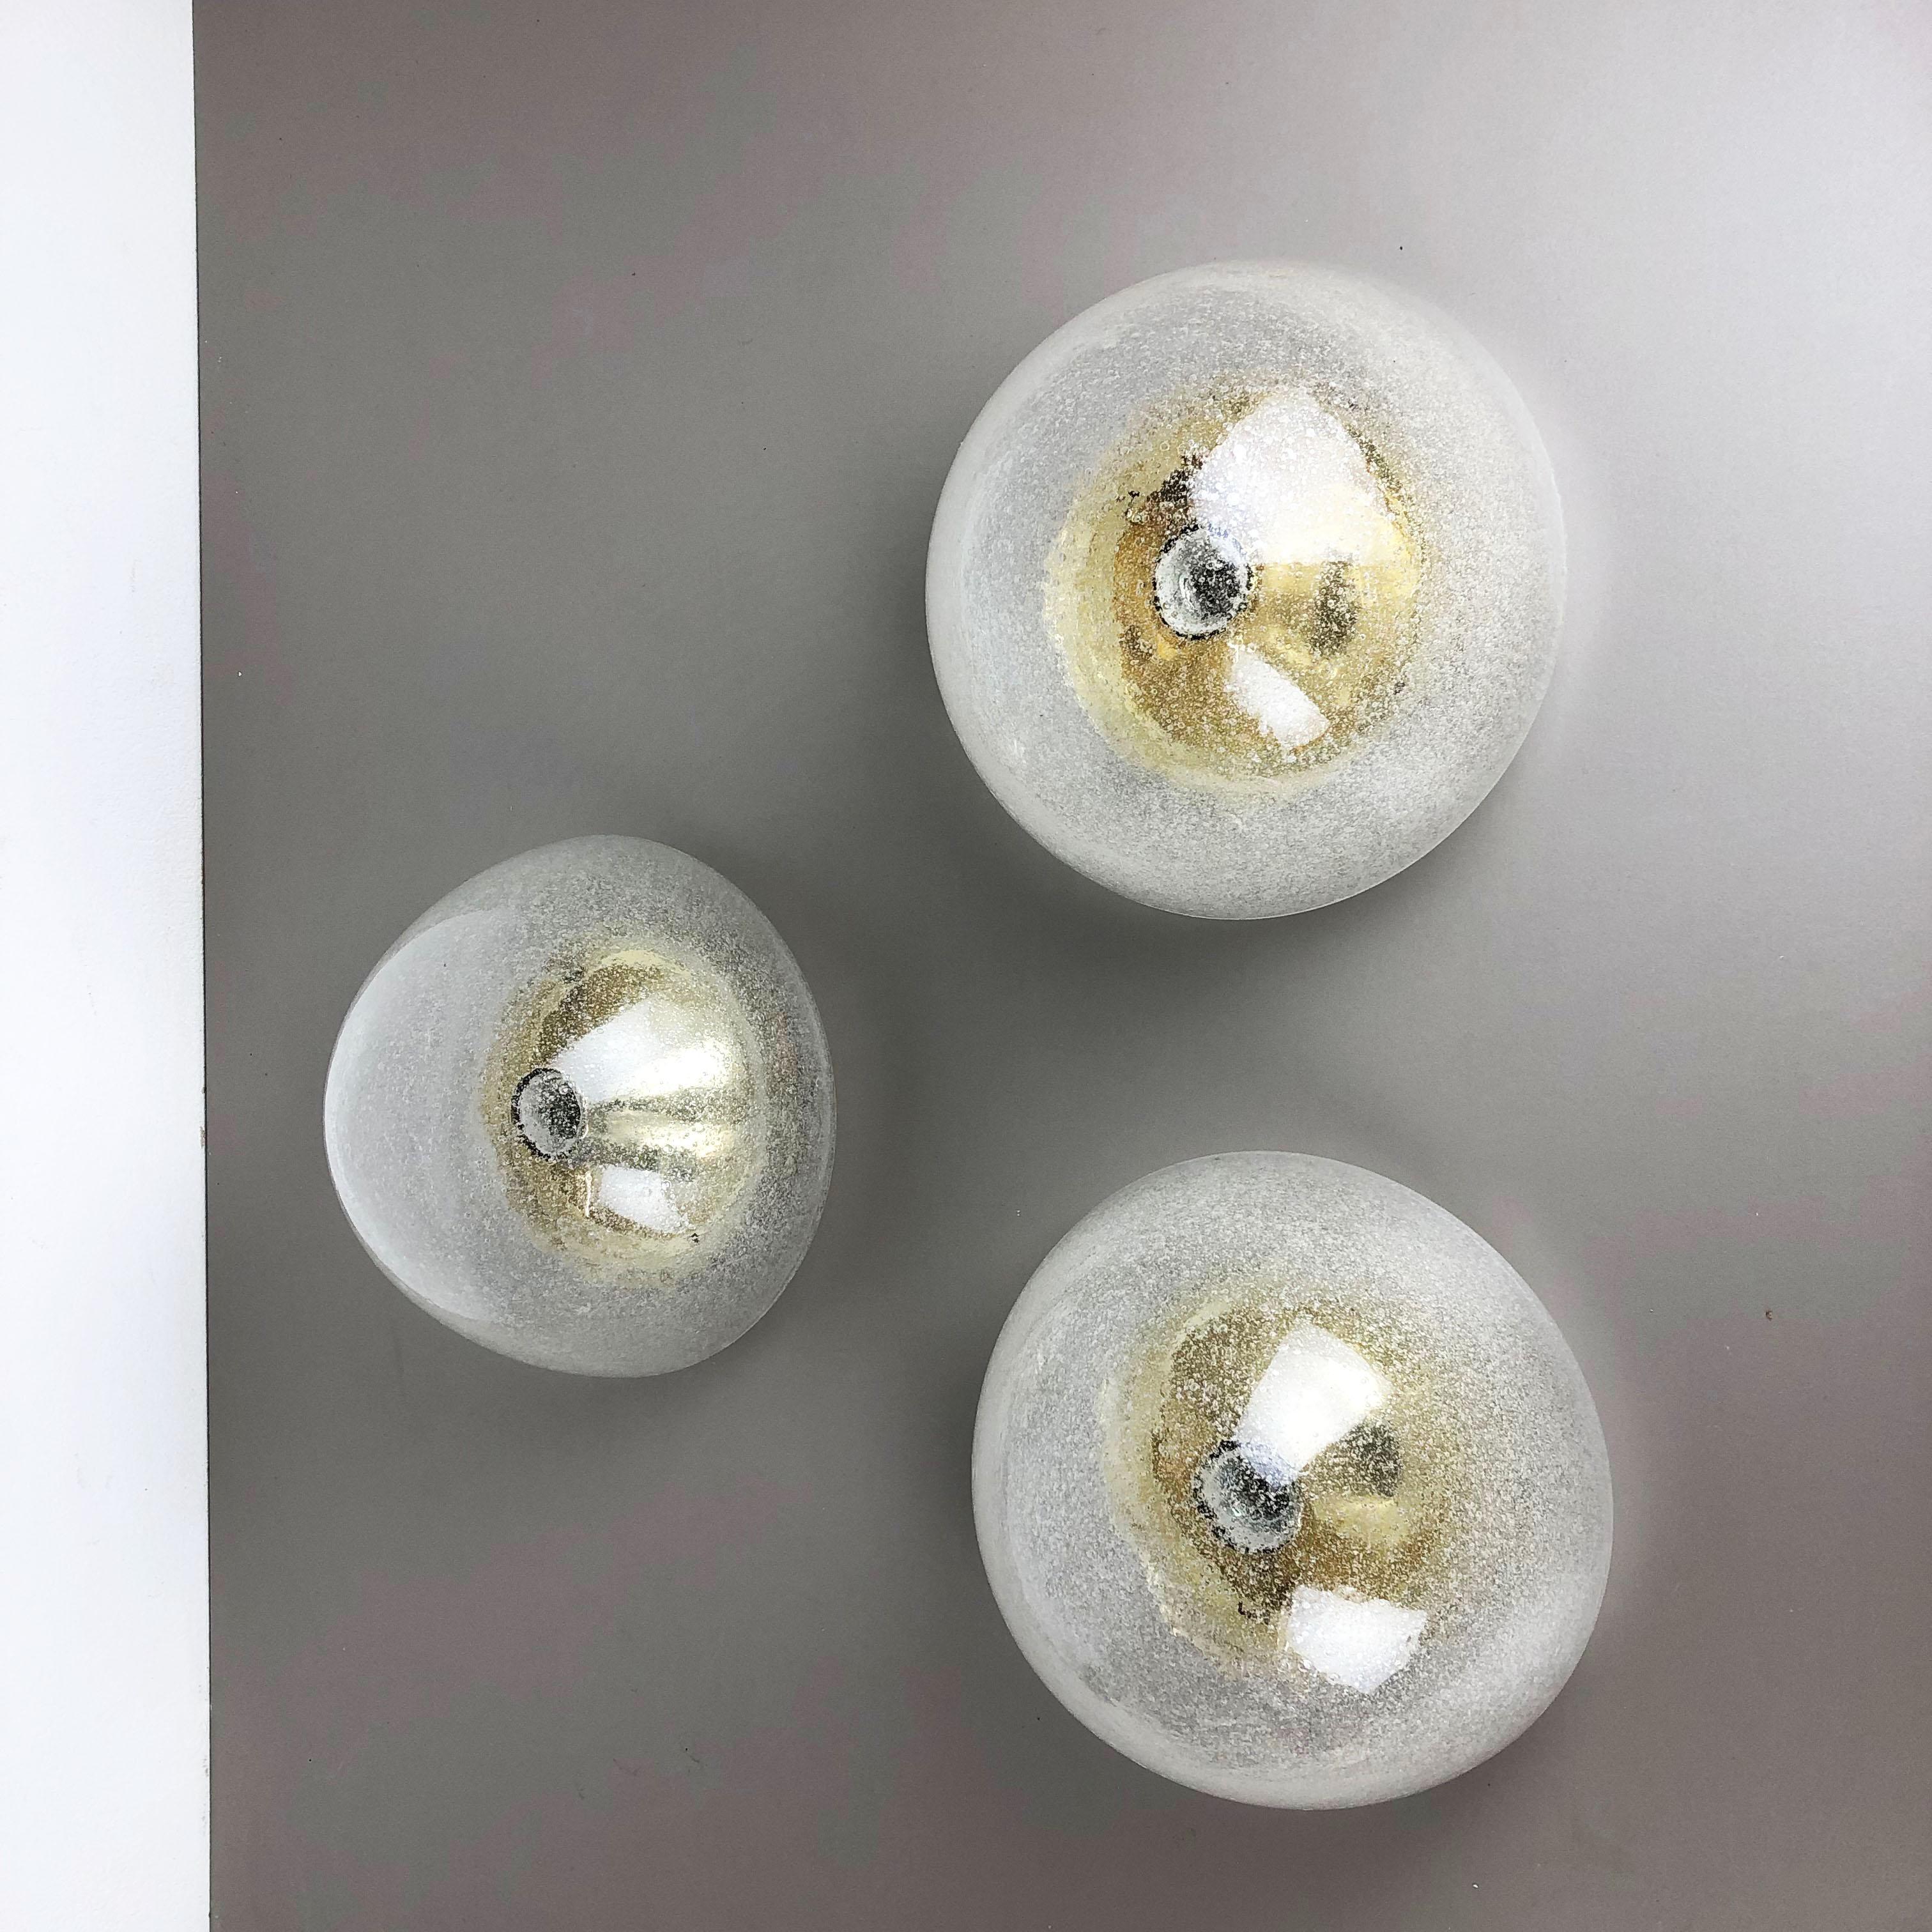 Article:

wall light sconce set of 3


Producer:

Hoffmeister Leuchten, Germany



Origin:

Germany



Age:

1970s



Description:

original set of 3 modernist german wall Lights made of high quality glass in cone form with